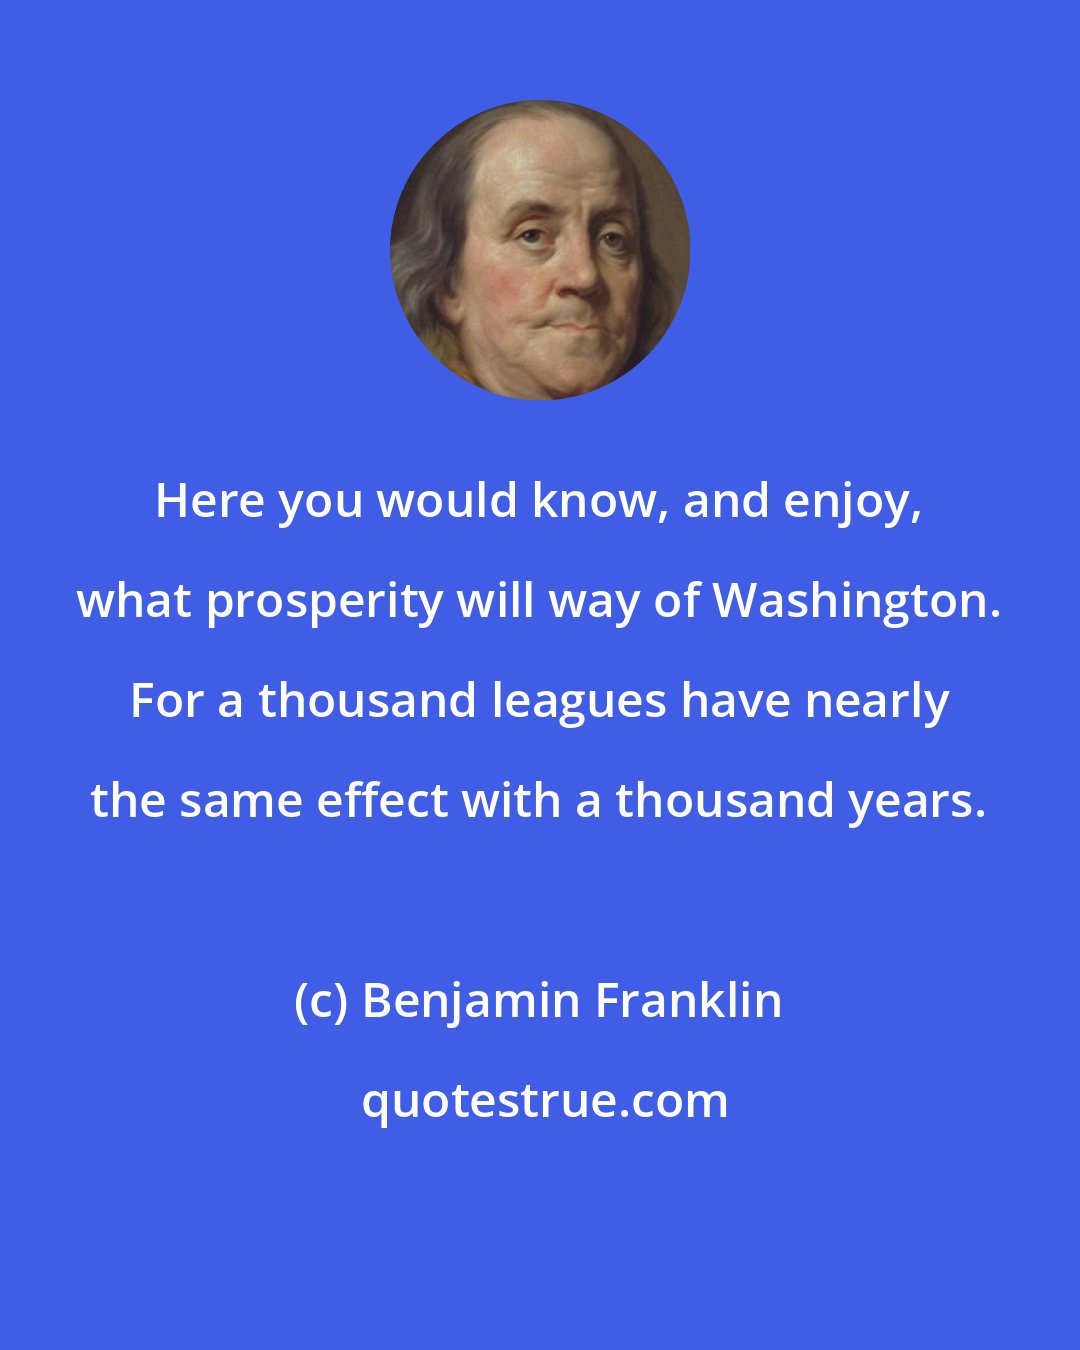 Benjamin Franklin: Here you would know, and enjoy, what prosperity will way of Washington. For a thousand leagues have nearly the same effect with a thousand years.